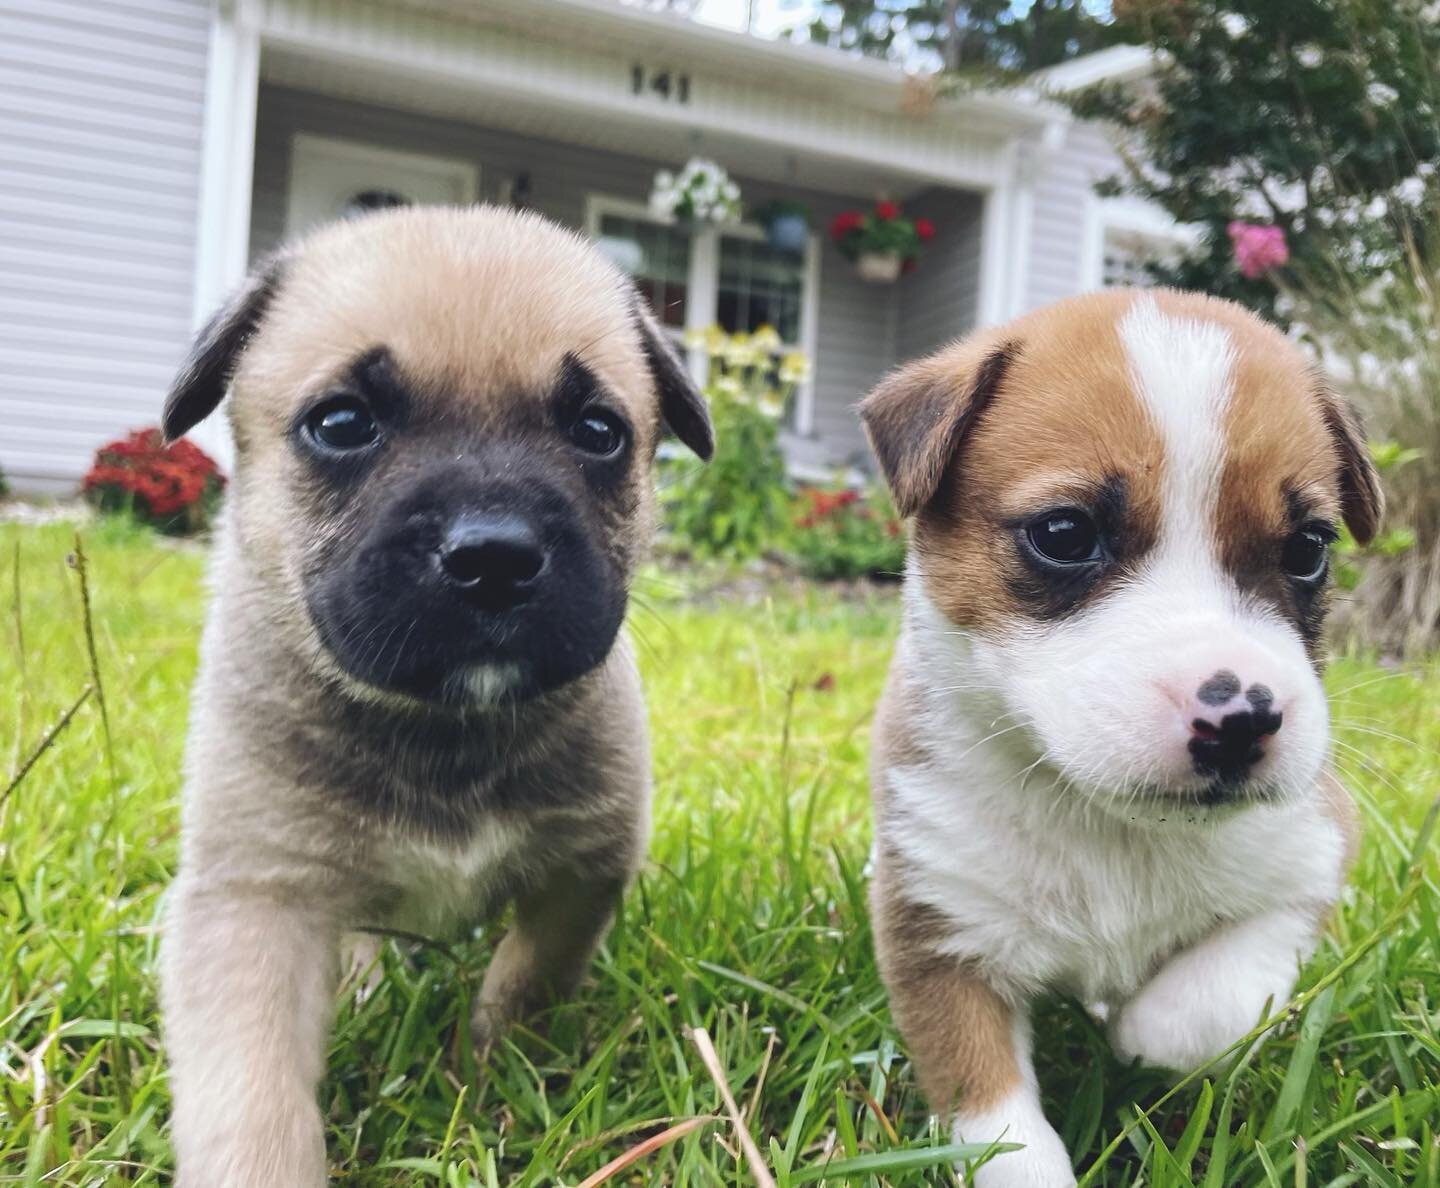 our bottle fed babies are officially looking for their forever homes 🥹

meet littlefoot (male, brown / left) and ducky (female, tri-color)🦖🦕

these kiddos are ~ 8 weeks old and the epitome of pokey little puppies. they&rsquo;re water and adventure